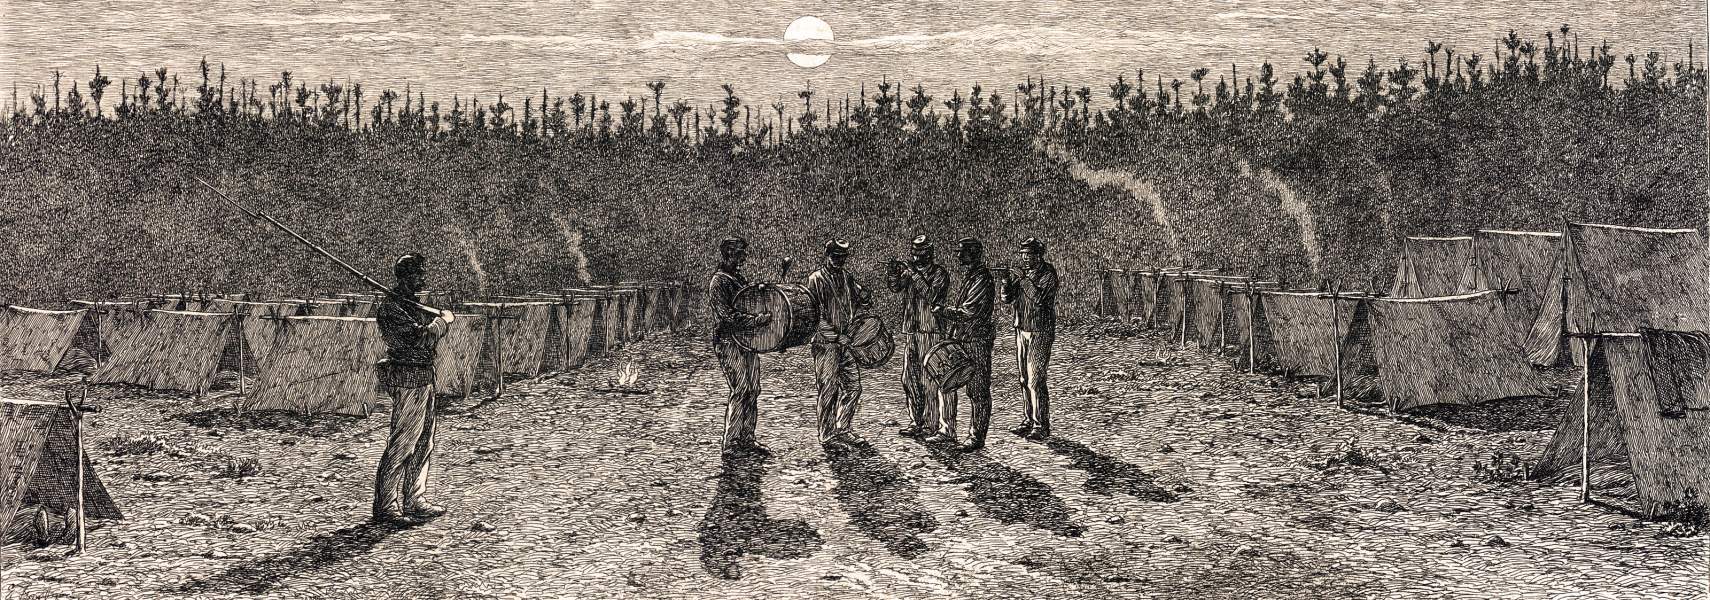 "Tattoo in Camp," Edwin Forbes, copper plate etching, 1876, zoomable image